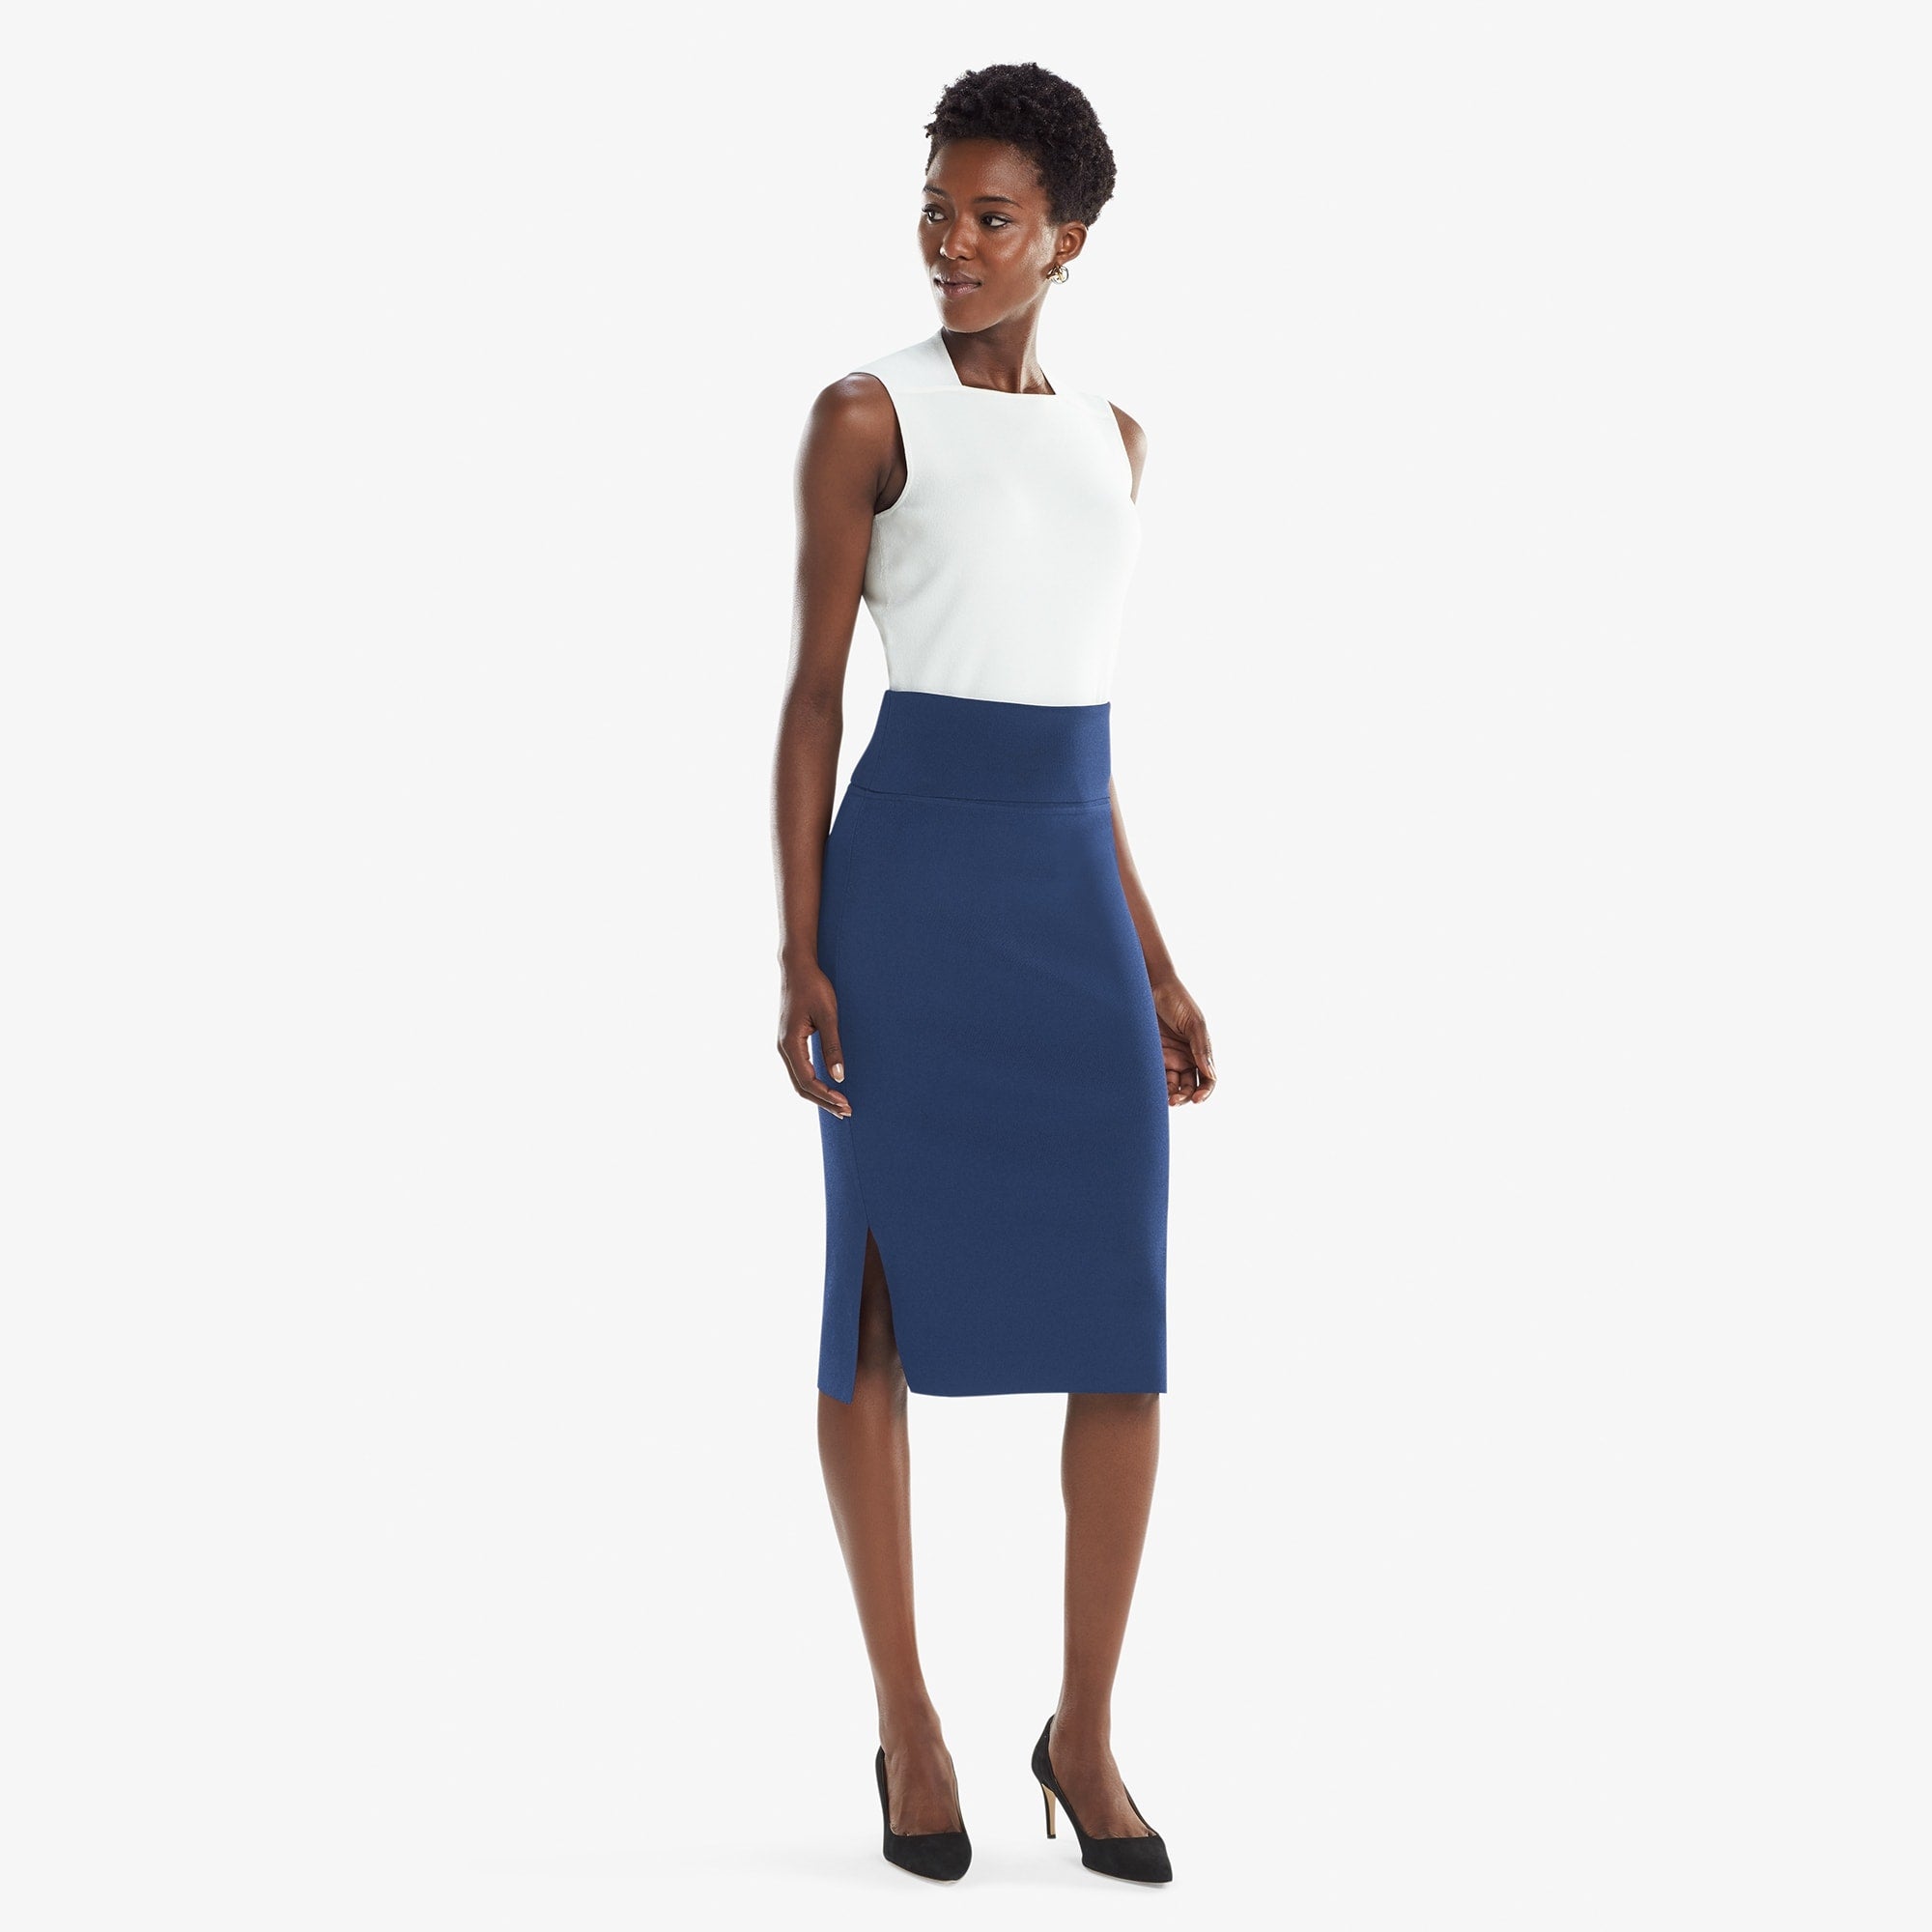 Front image of a woman standing wearing the Harlem skirt in Regent blue 